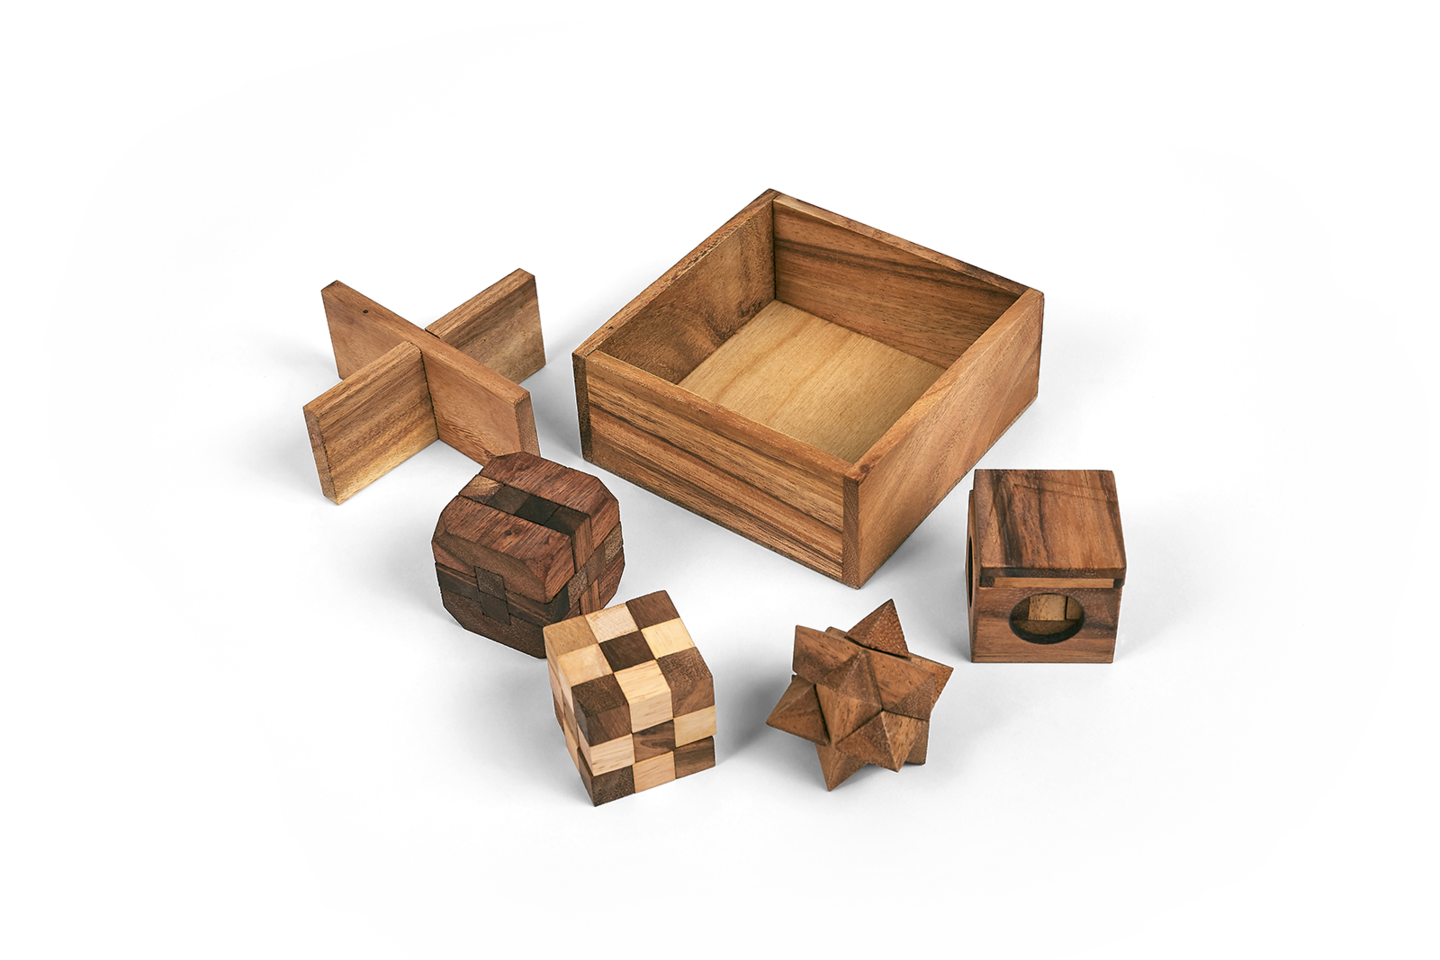 5 Puzzles in a Wooden Box